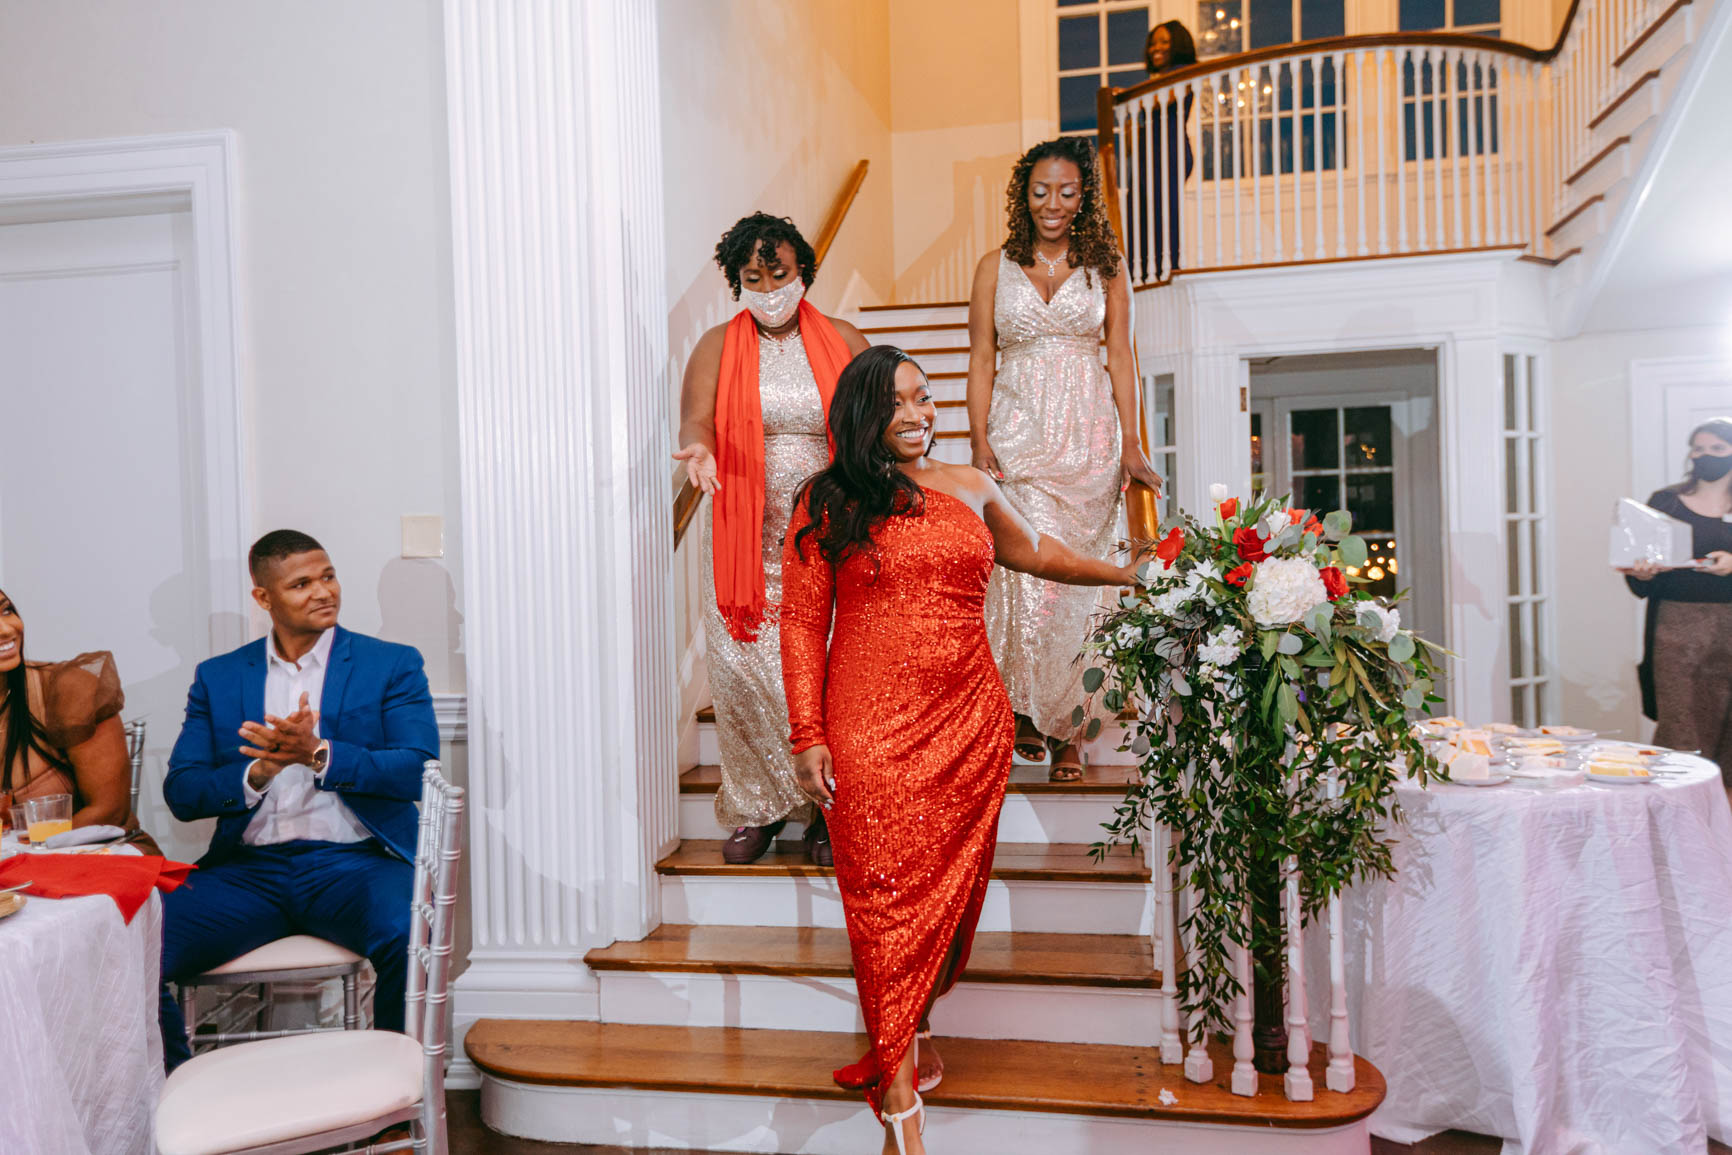 bride evening gown reveal at Separk Mansion in Gastonia NC shot by Nhieu Tang Photography | nhieutang.com